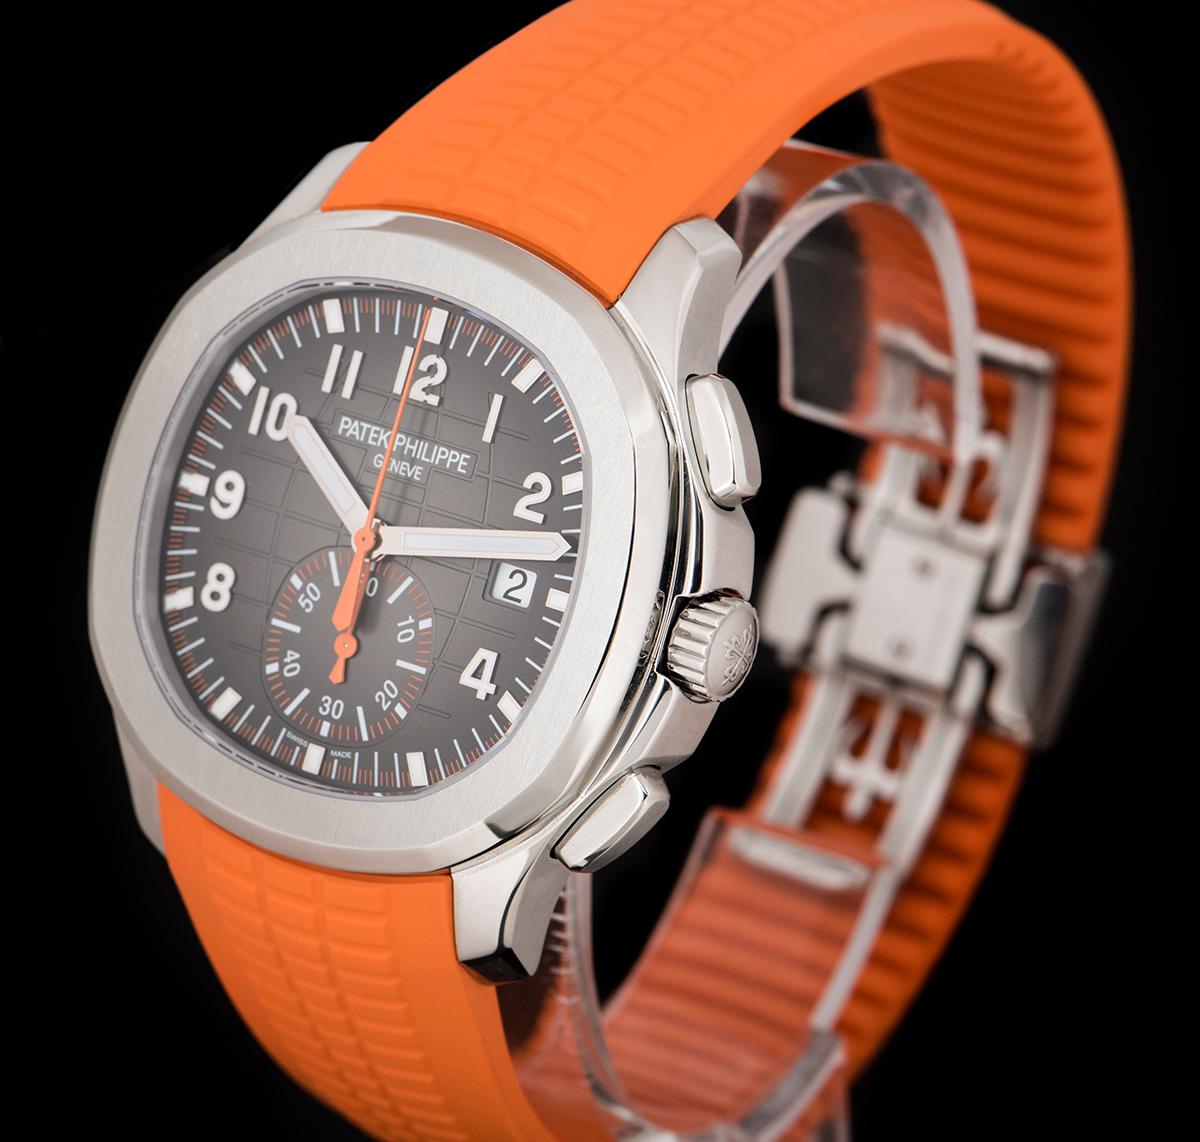 An Unworn Stainless Steel Aquanaut Gents Wristwatch, black embossed dial with applied arabic numbers, date at 3 0'clock, 60 minute recorder at 6 0'clock, orange chronograph hand, a fixed stainless steel bezel, an original orange  